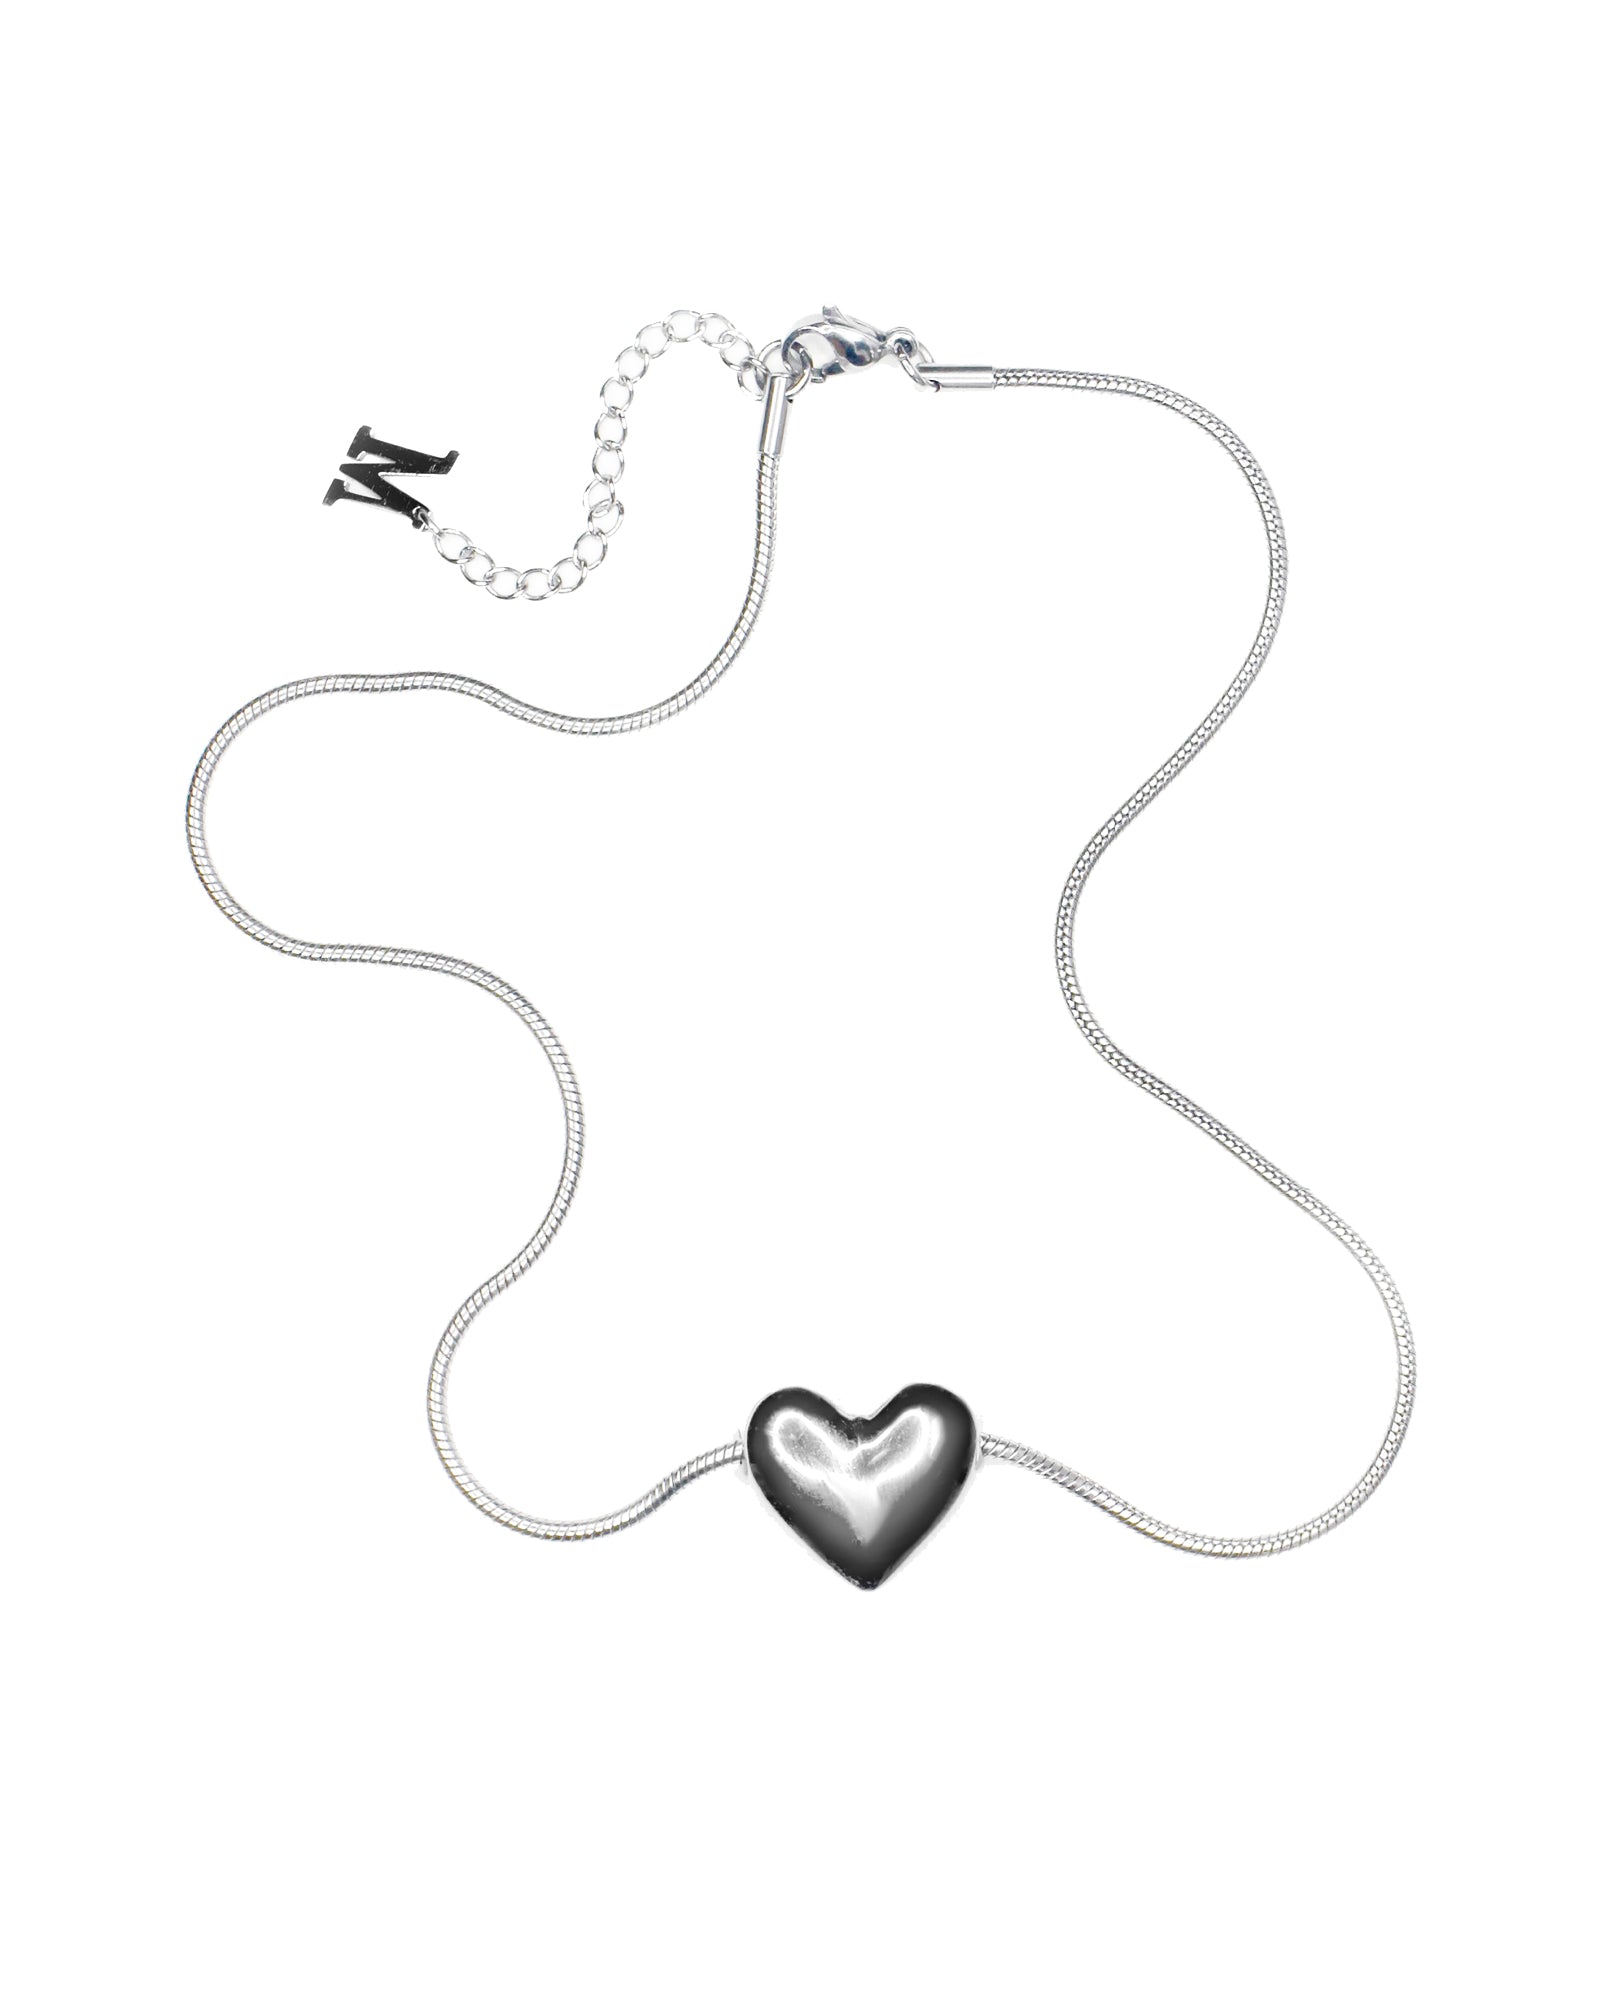 LONELY HEARTS NECKLACE